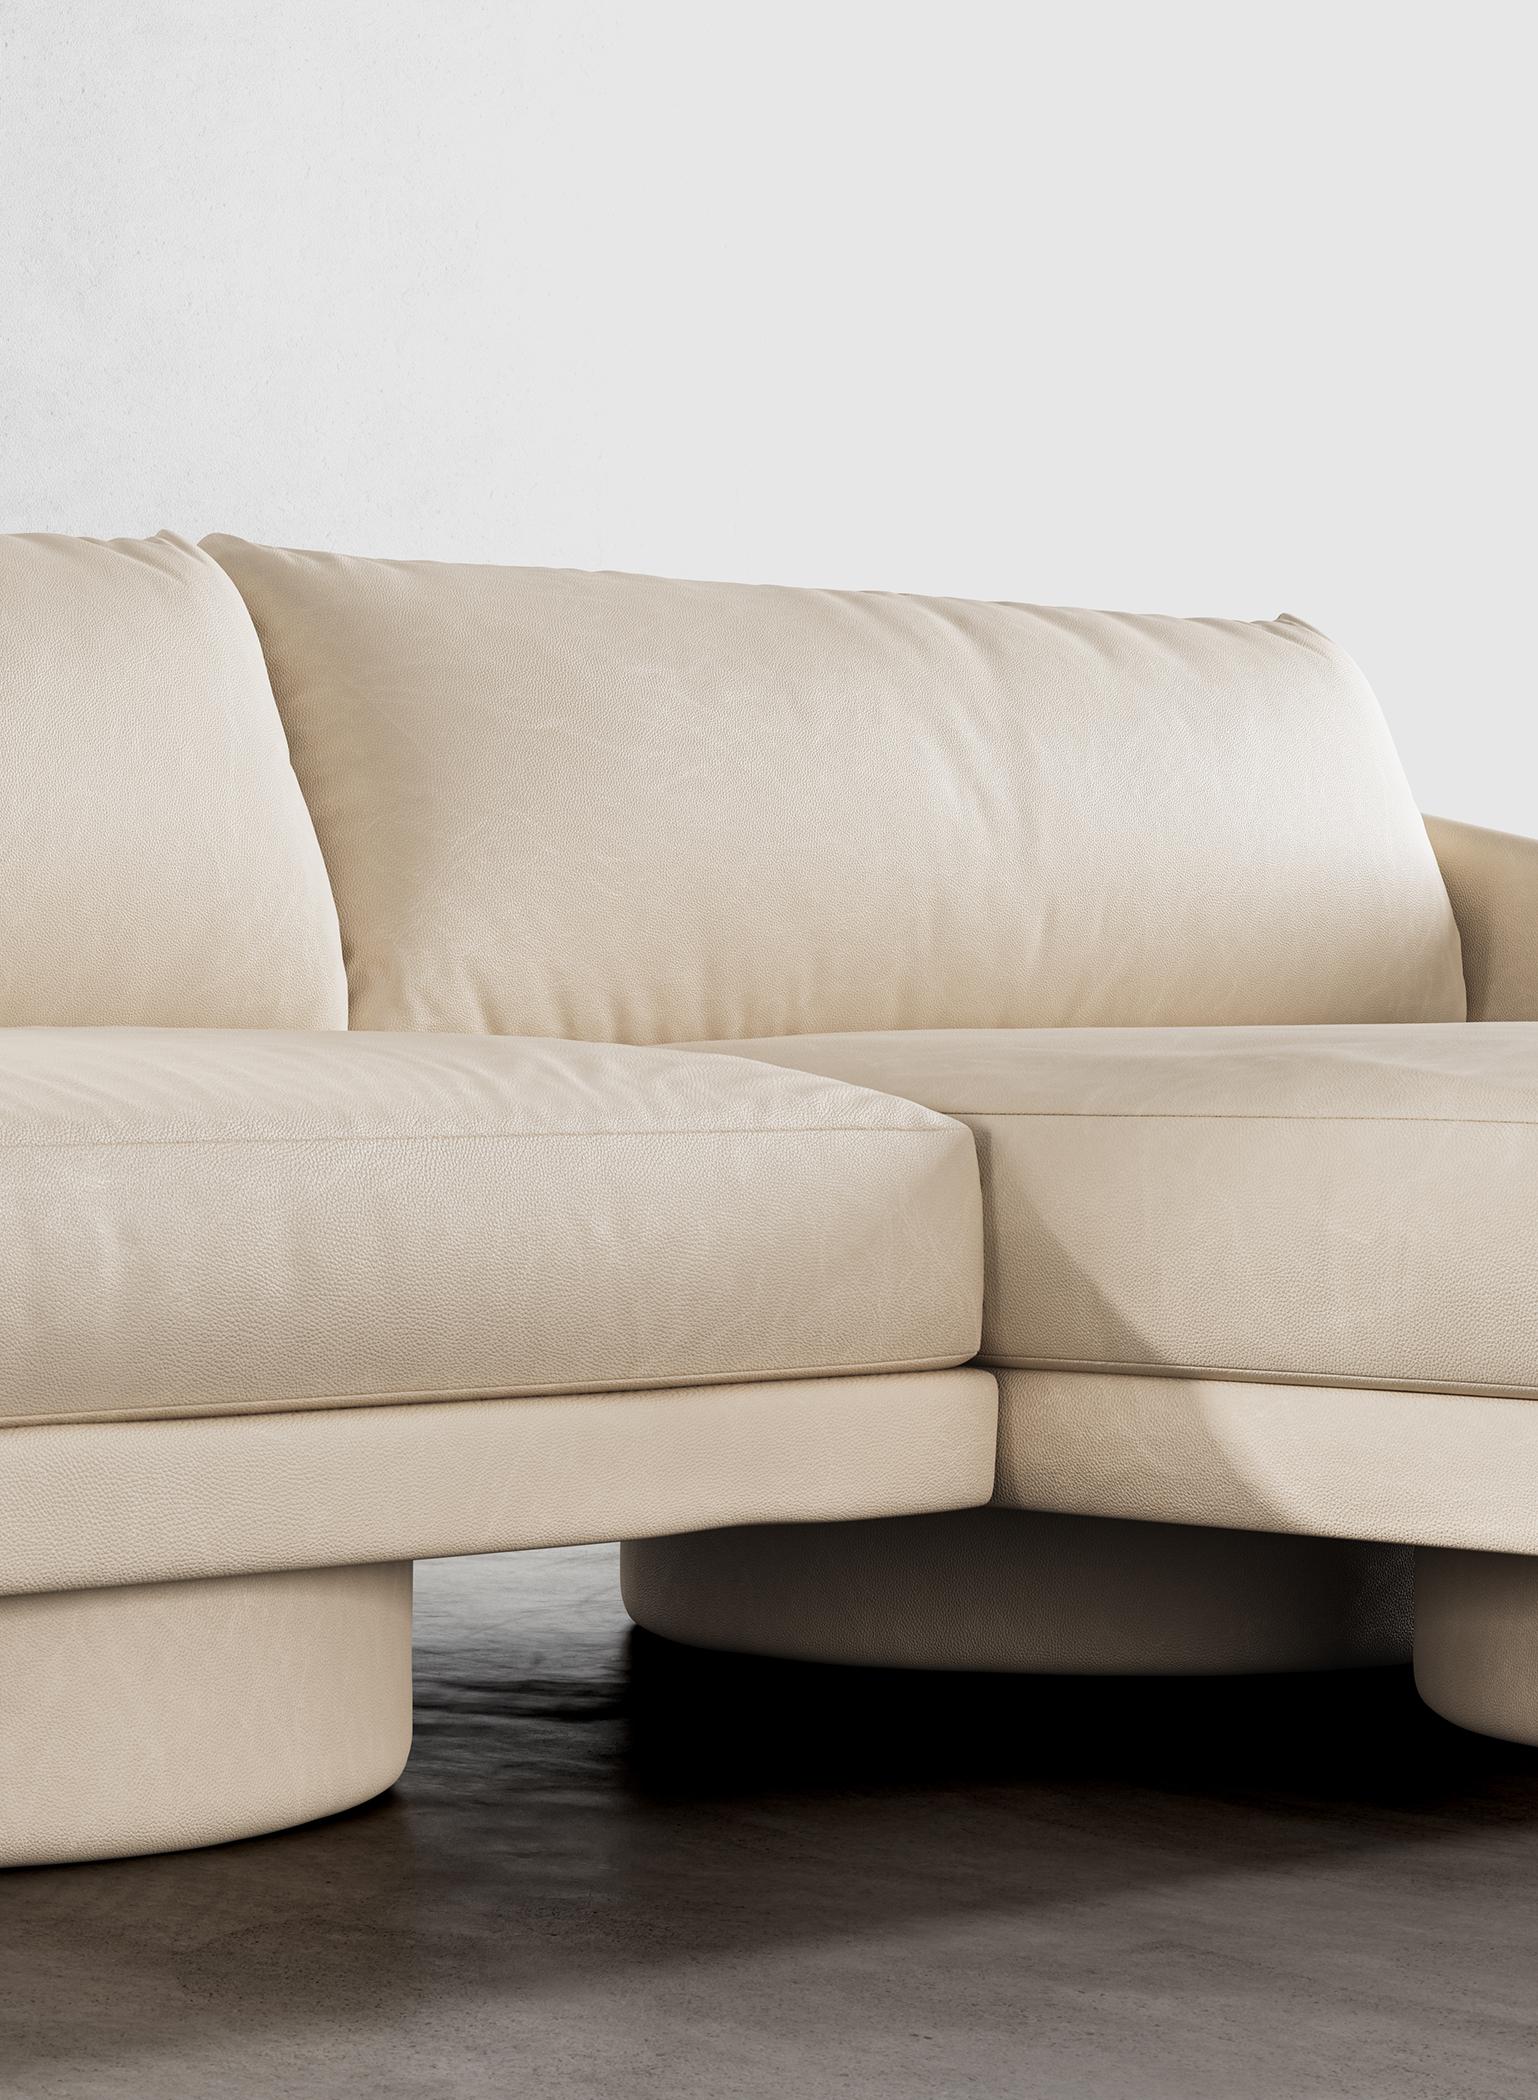 SURGE SECTIONAL - Modern Sectional Sofa in Cream Faux Leather For Sale ...